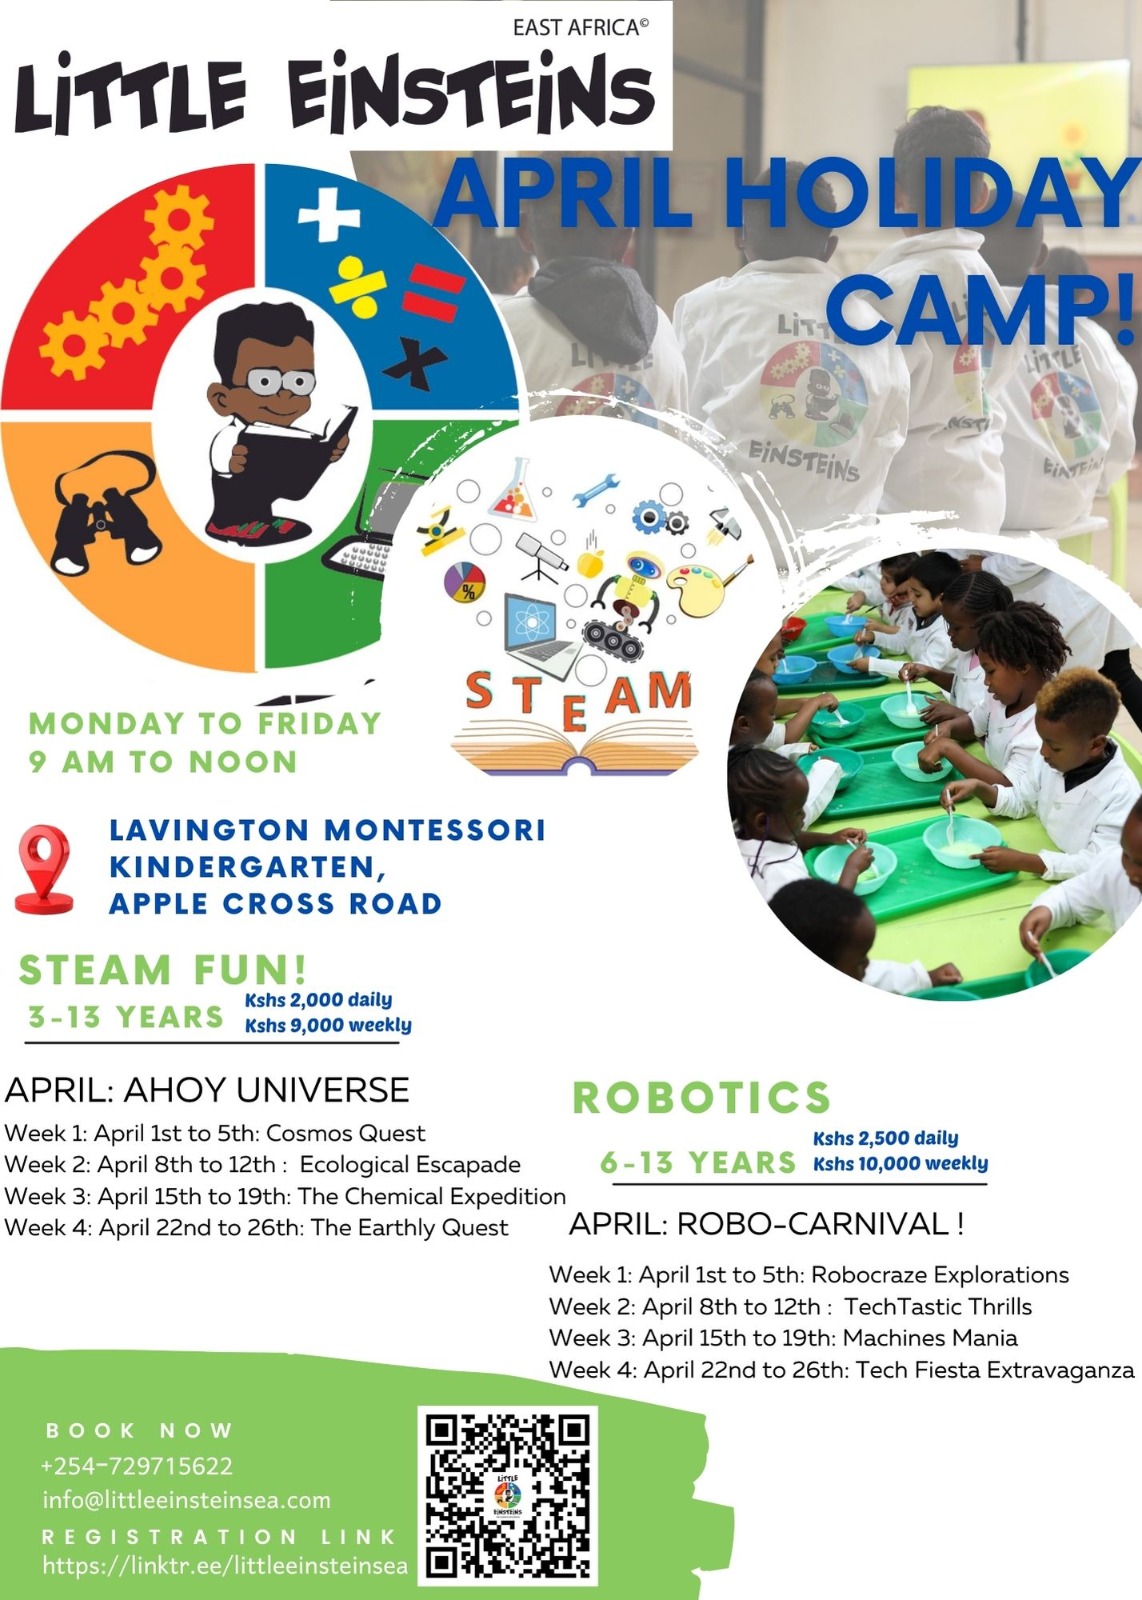 Little Einsteins East Africa April Holiday Camp